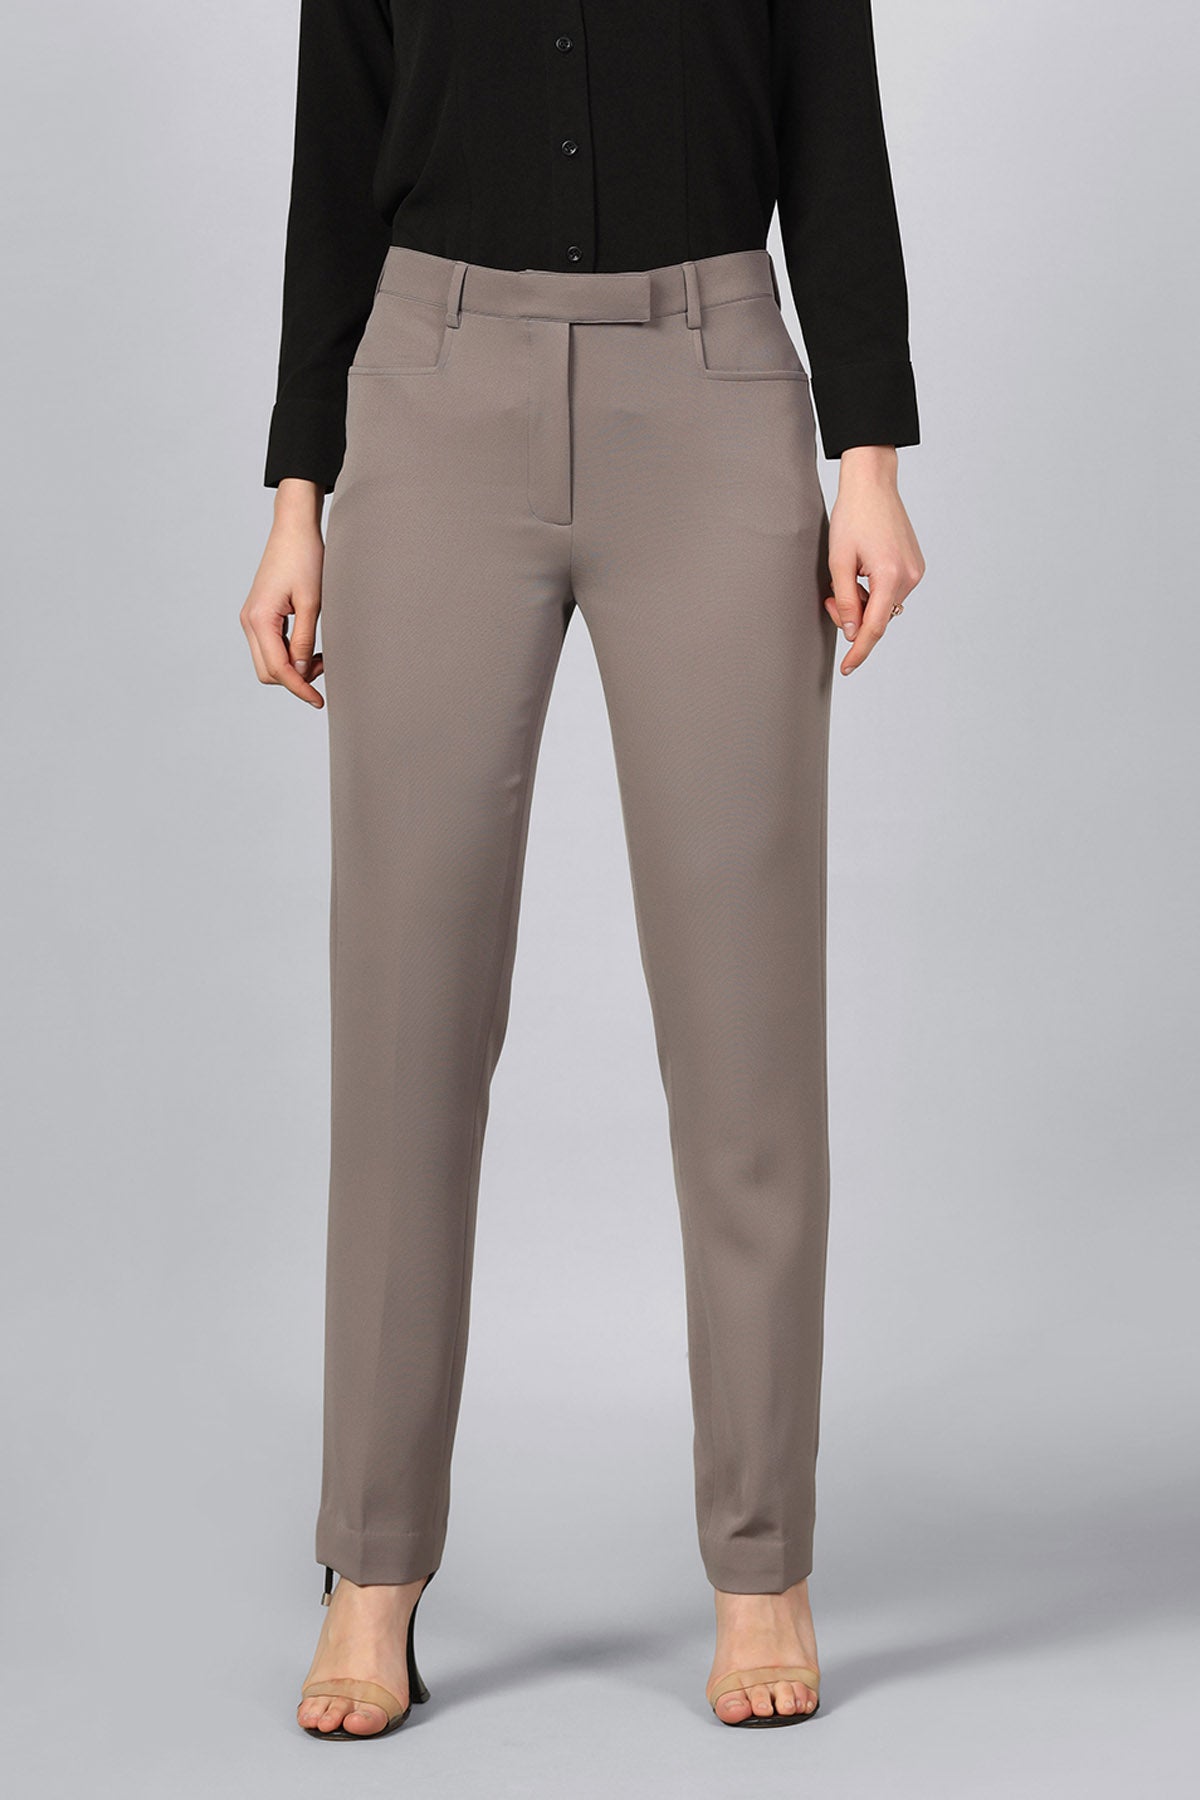 Buy PowerSutra Formal Stretch Pants For Women Available online at  ScrollnShops